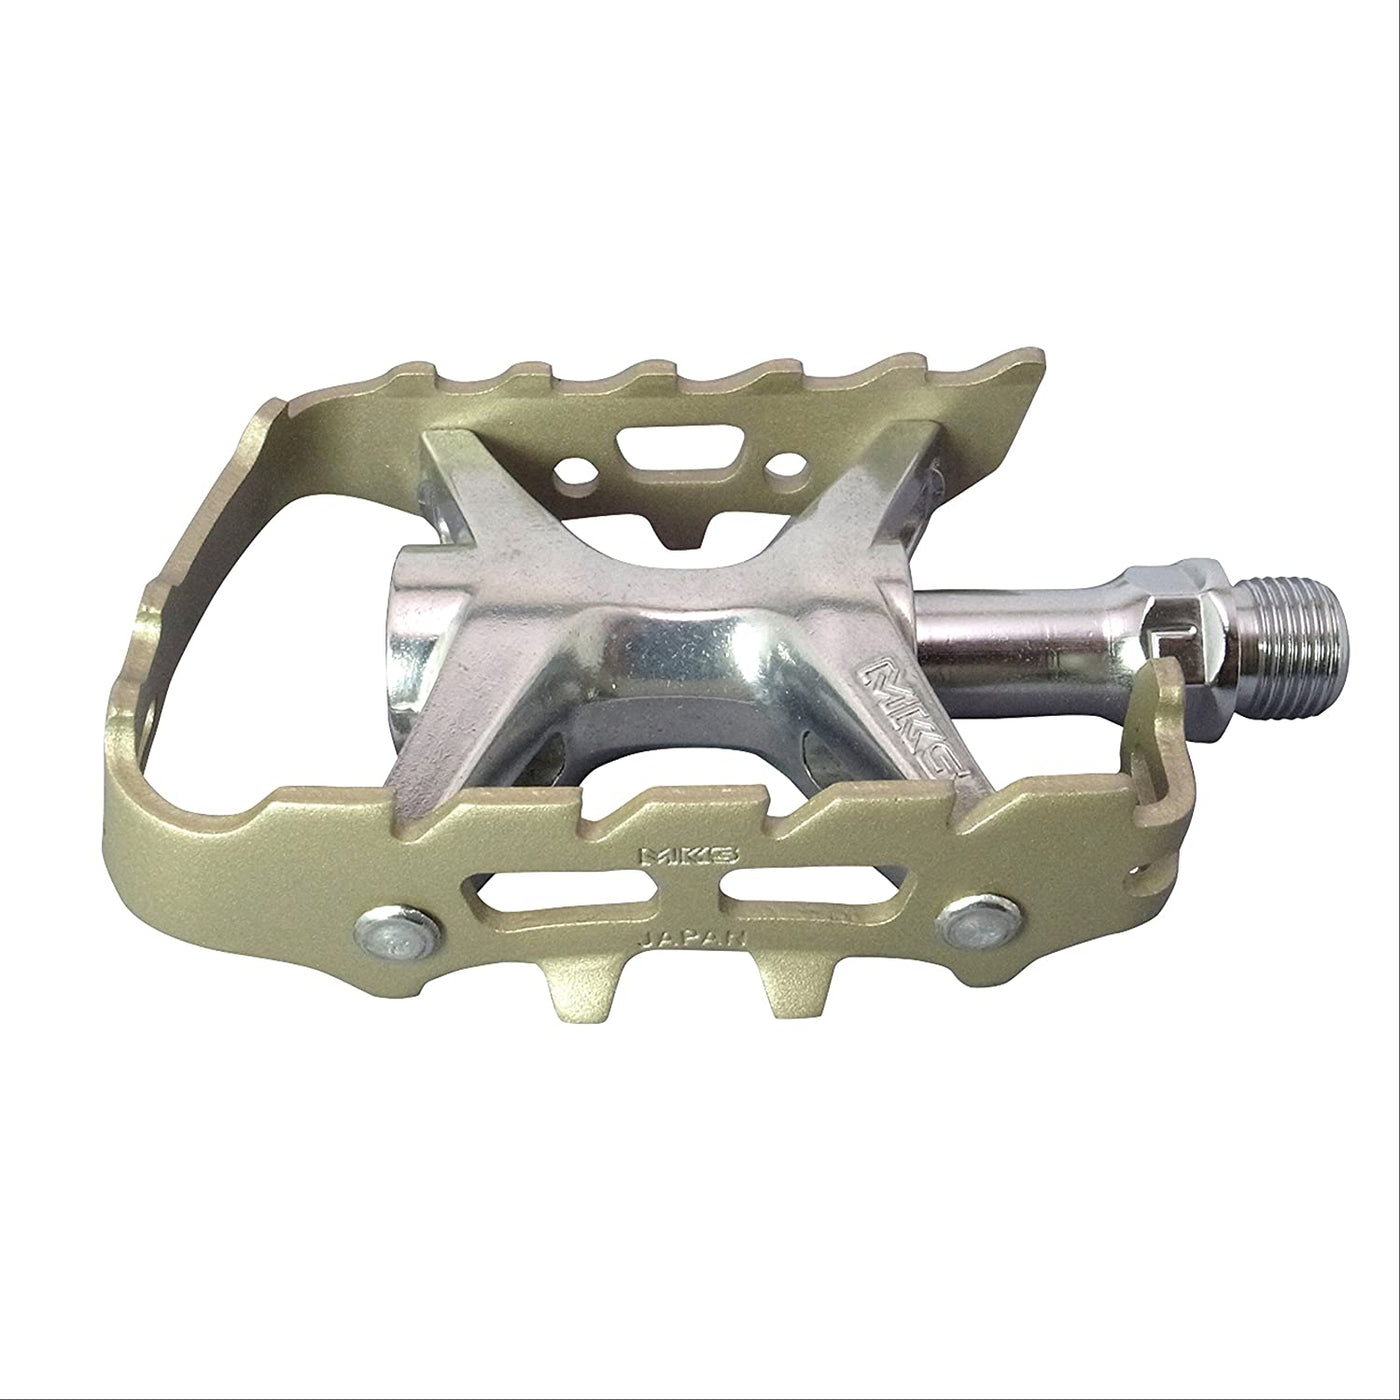 MKS MT-LUX Comp Pedals - Cyclop.in